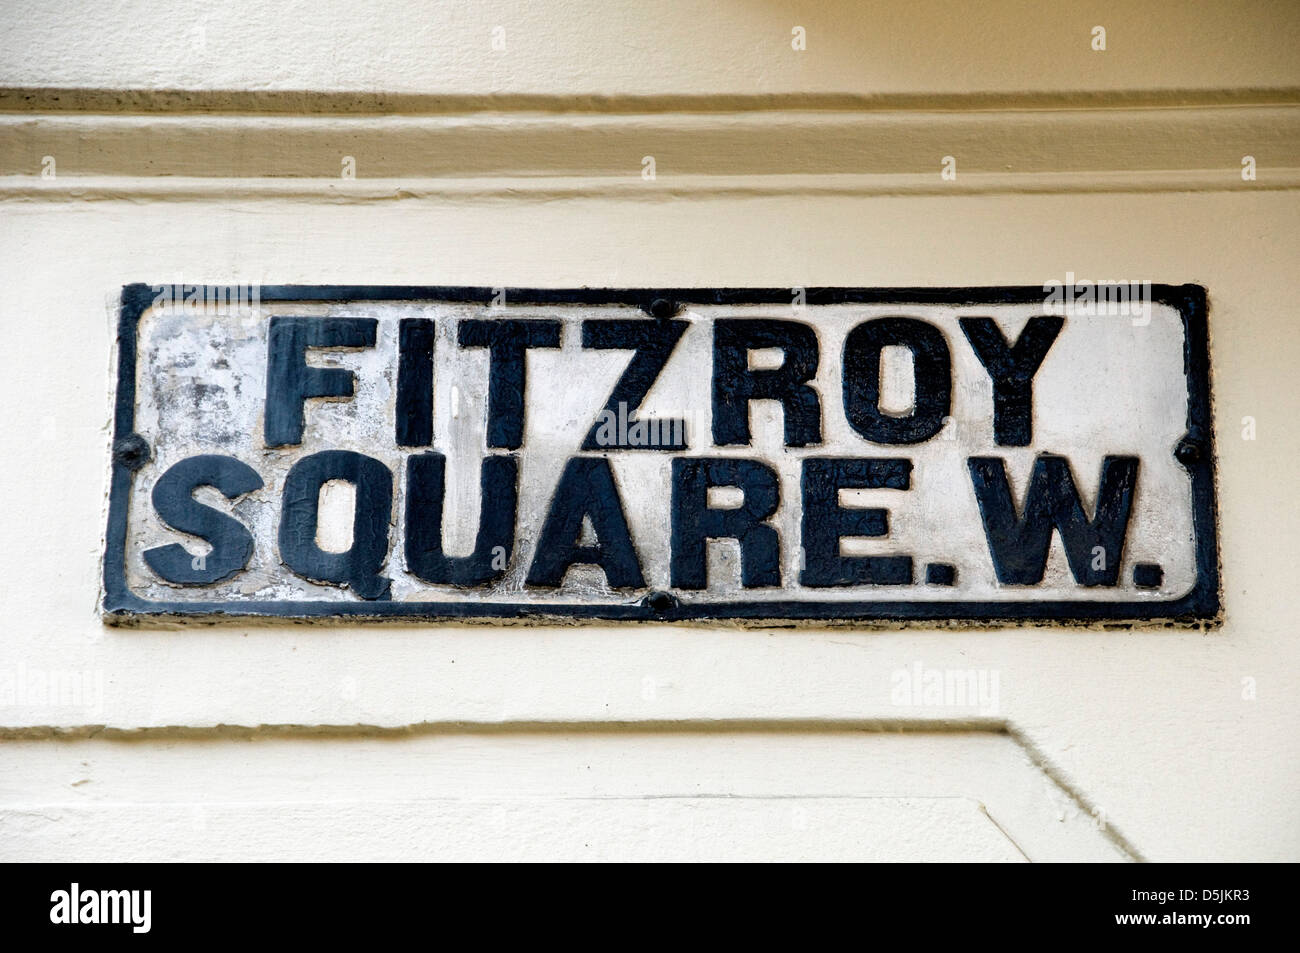 Fitzroy Square W street sign, Fitzrovia, Londres W1 England UK Banque D'Images